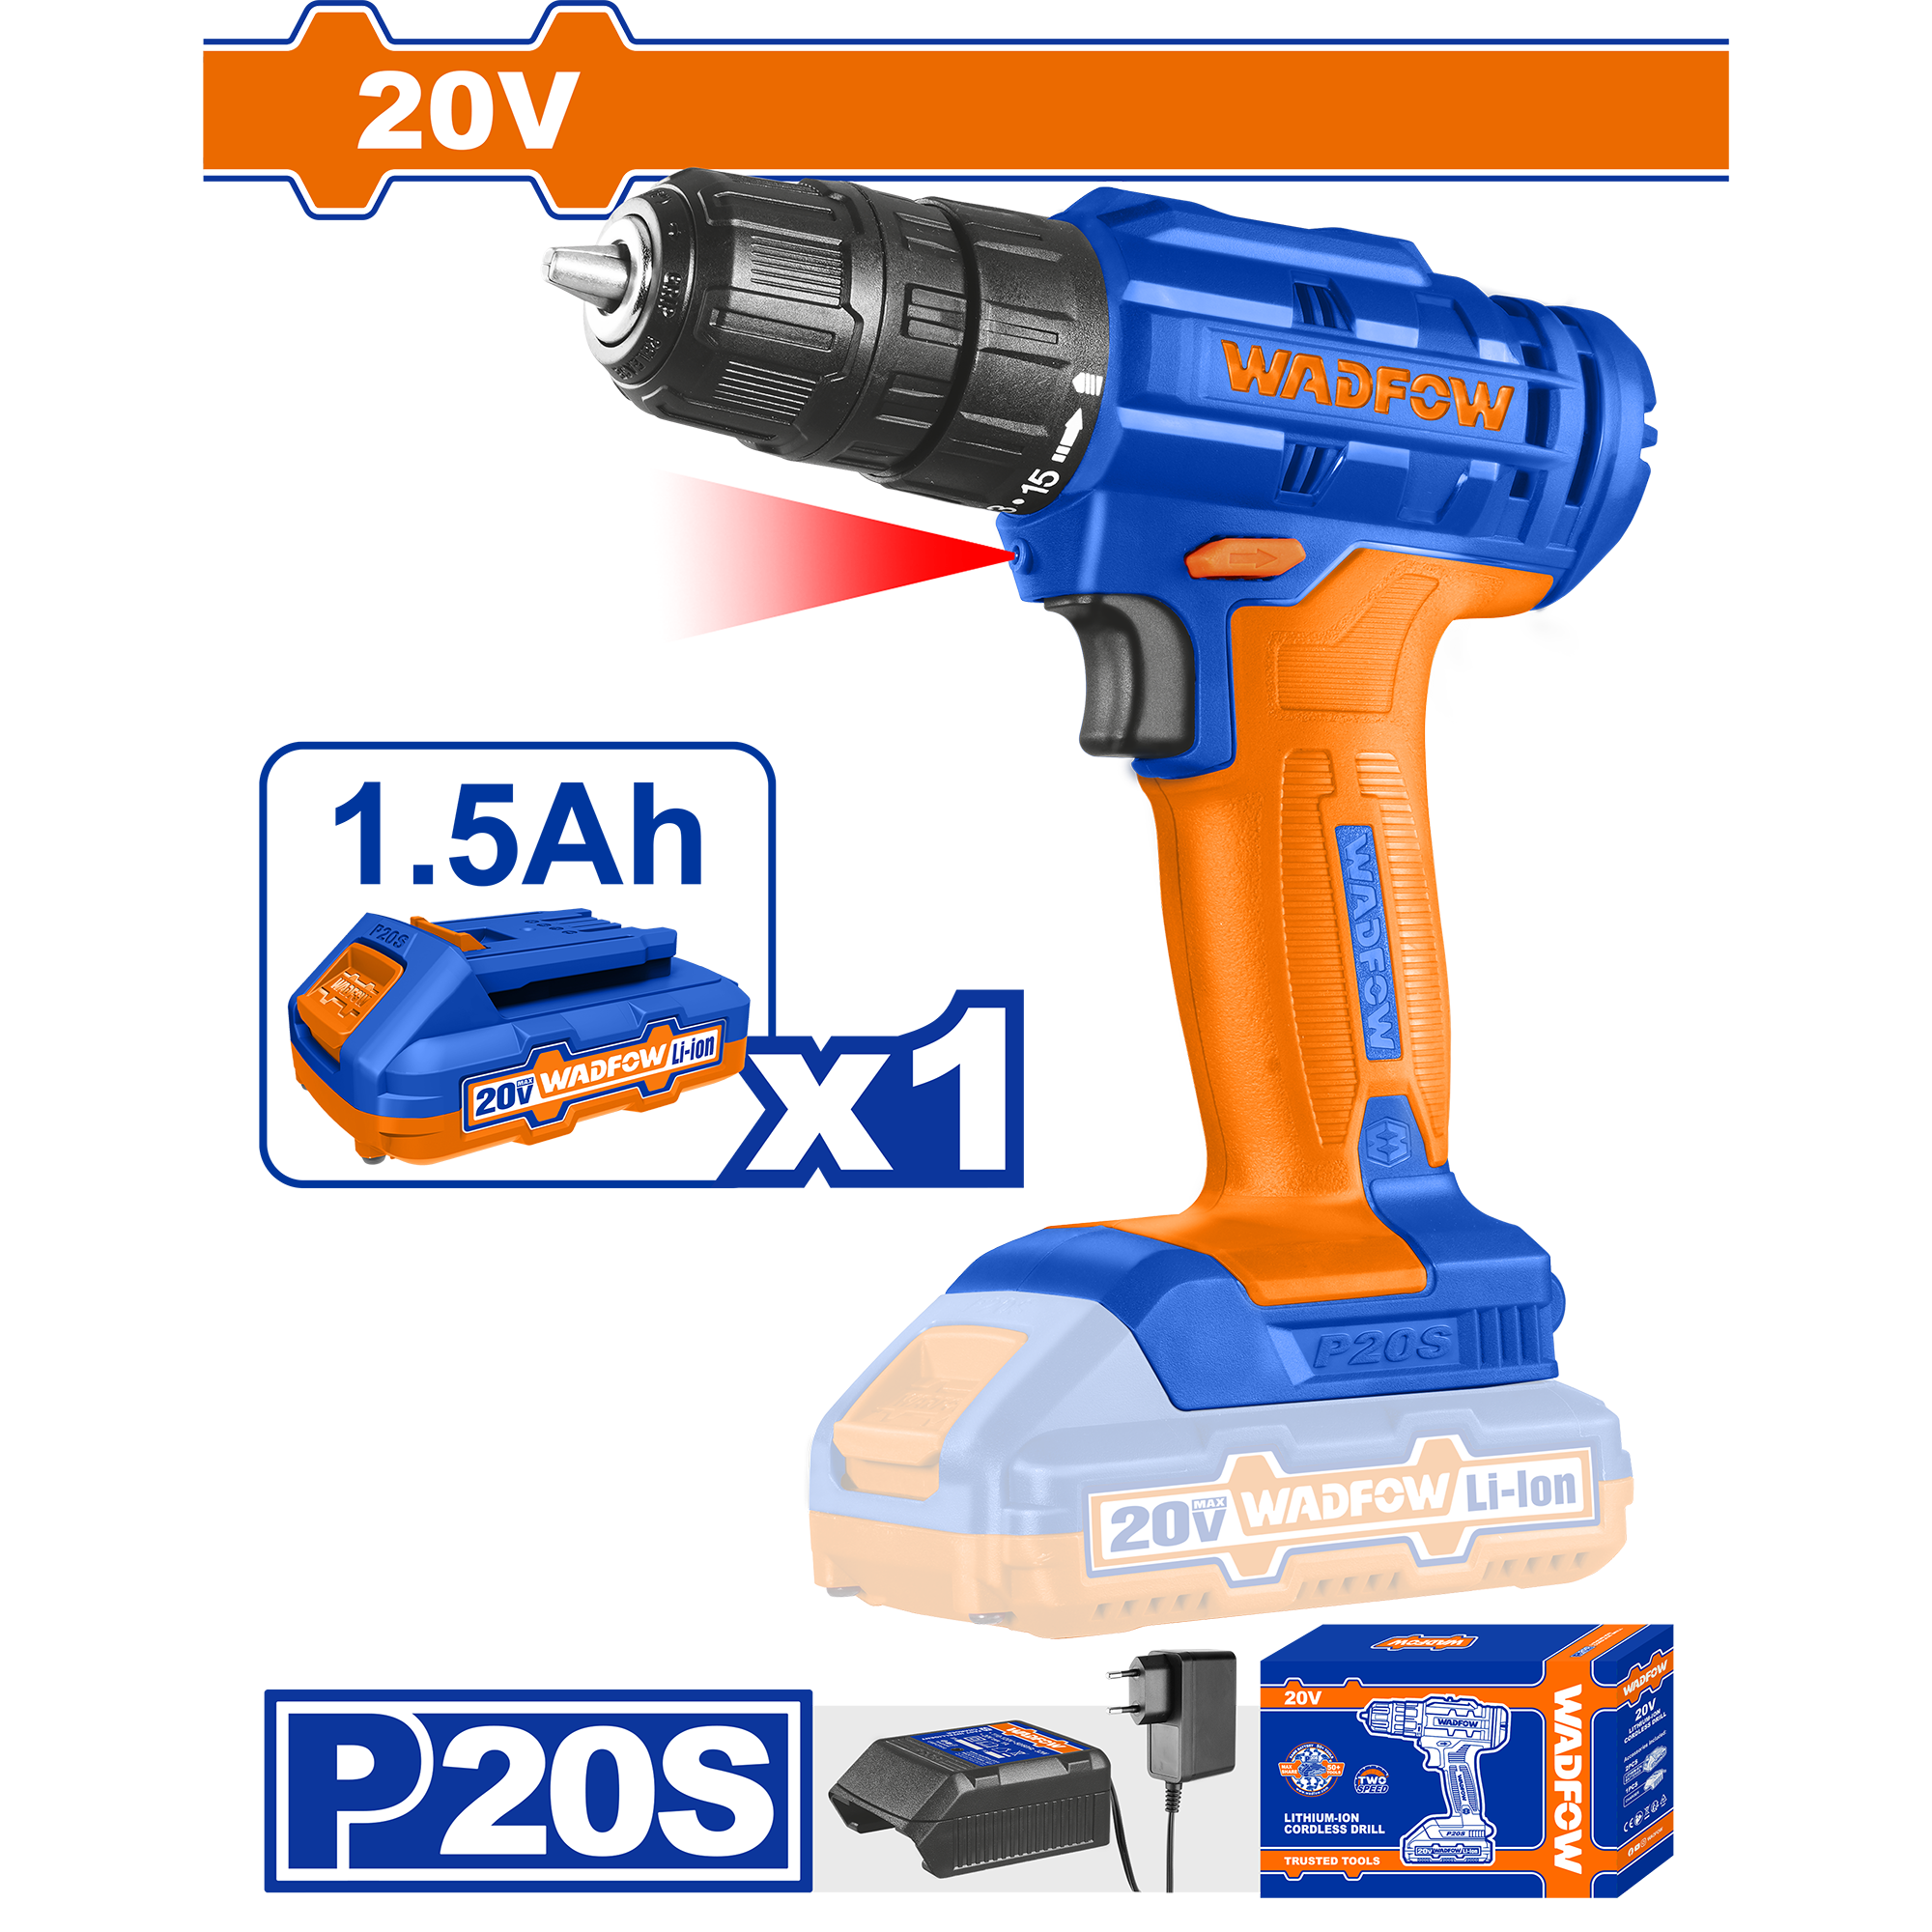 CORDLESS DRILL 20 VOLT WITH 1 BATTERY